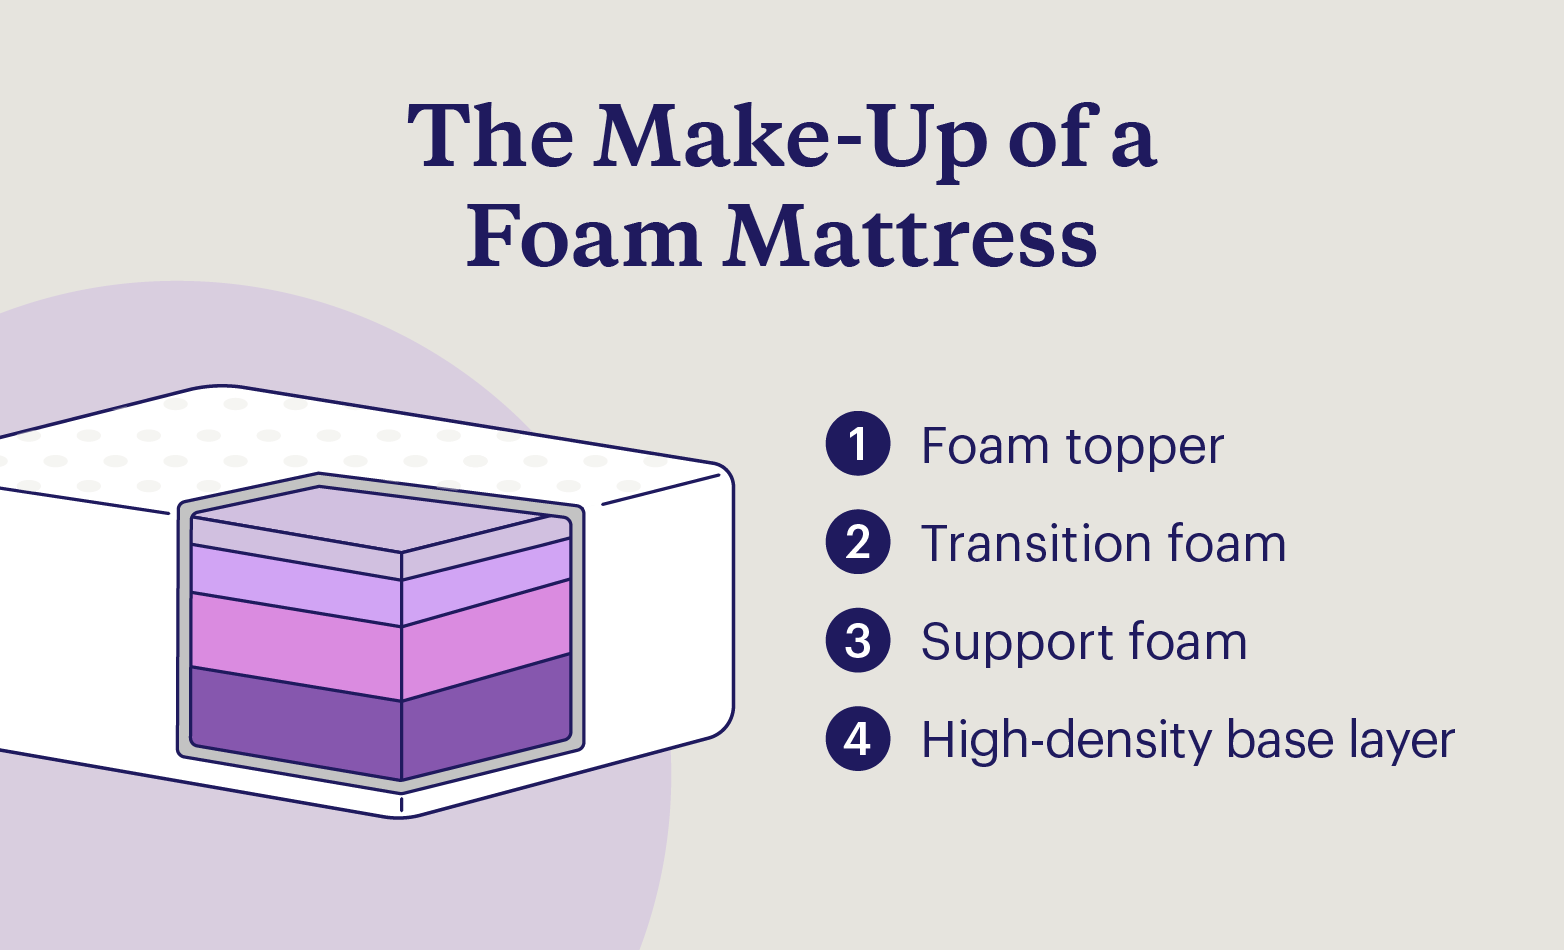 Graphic showing the layers of a foam mattress.